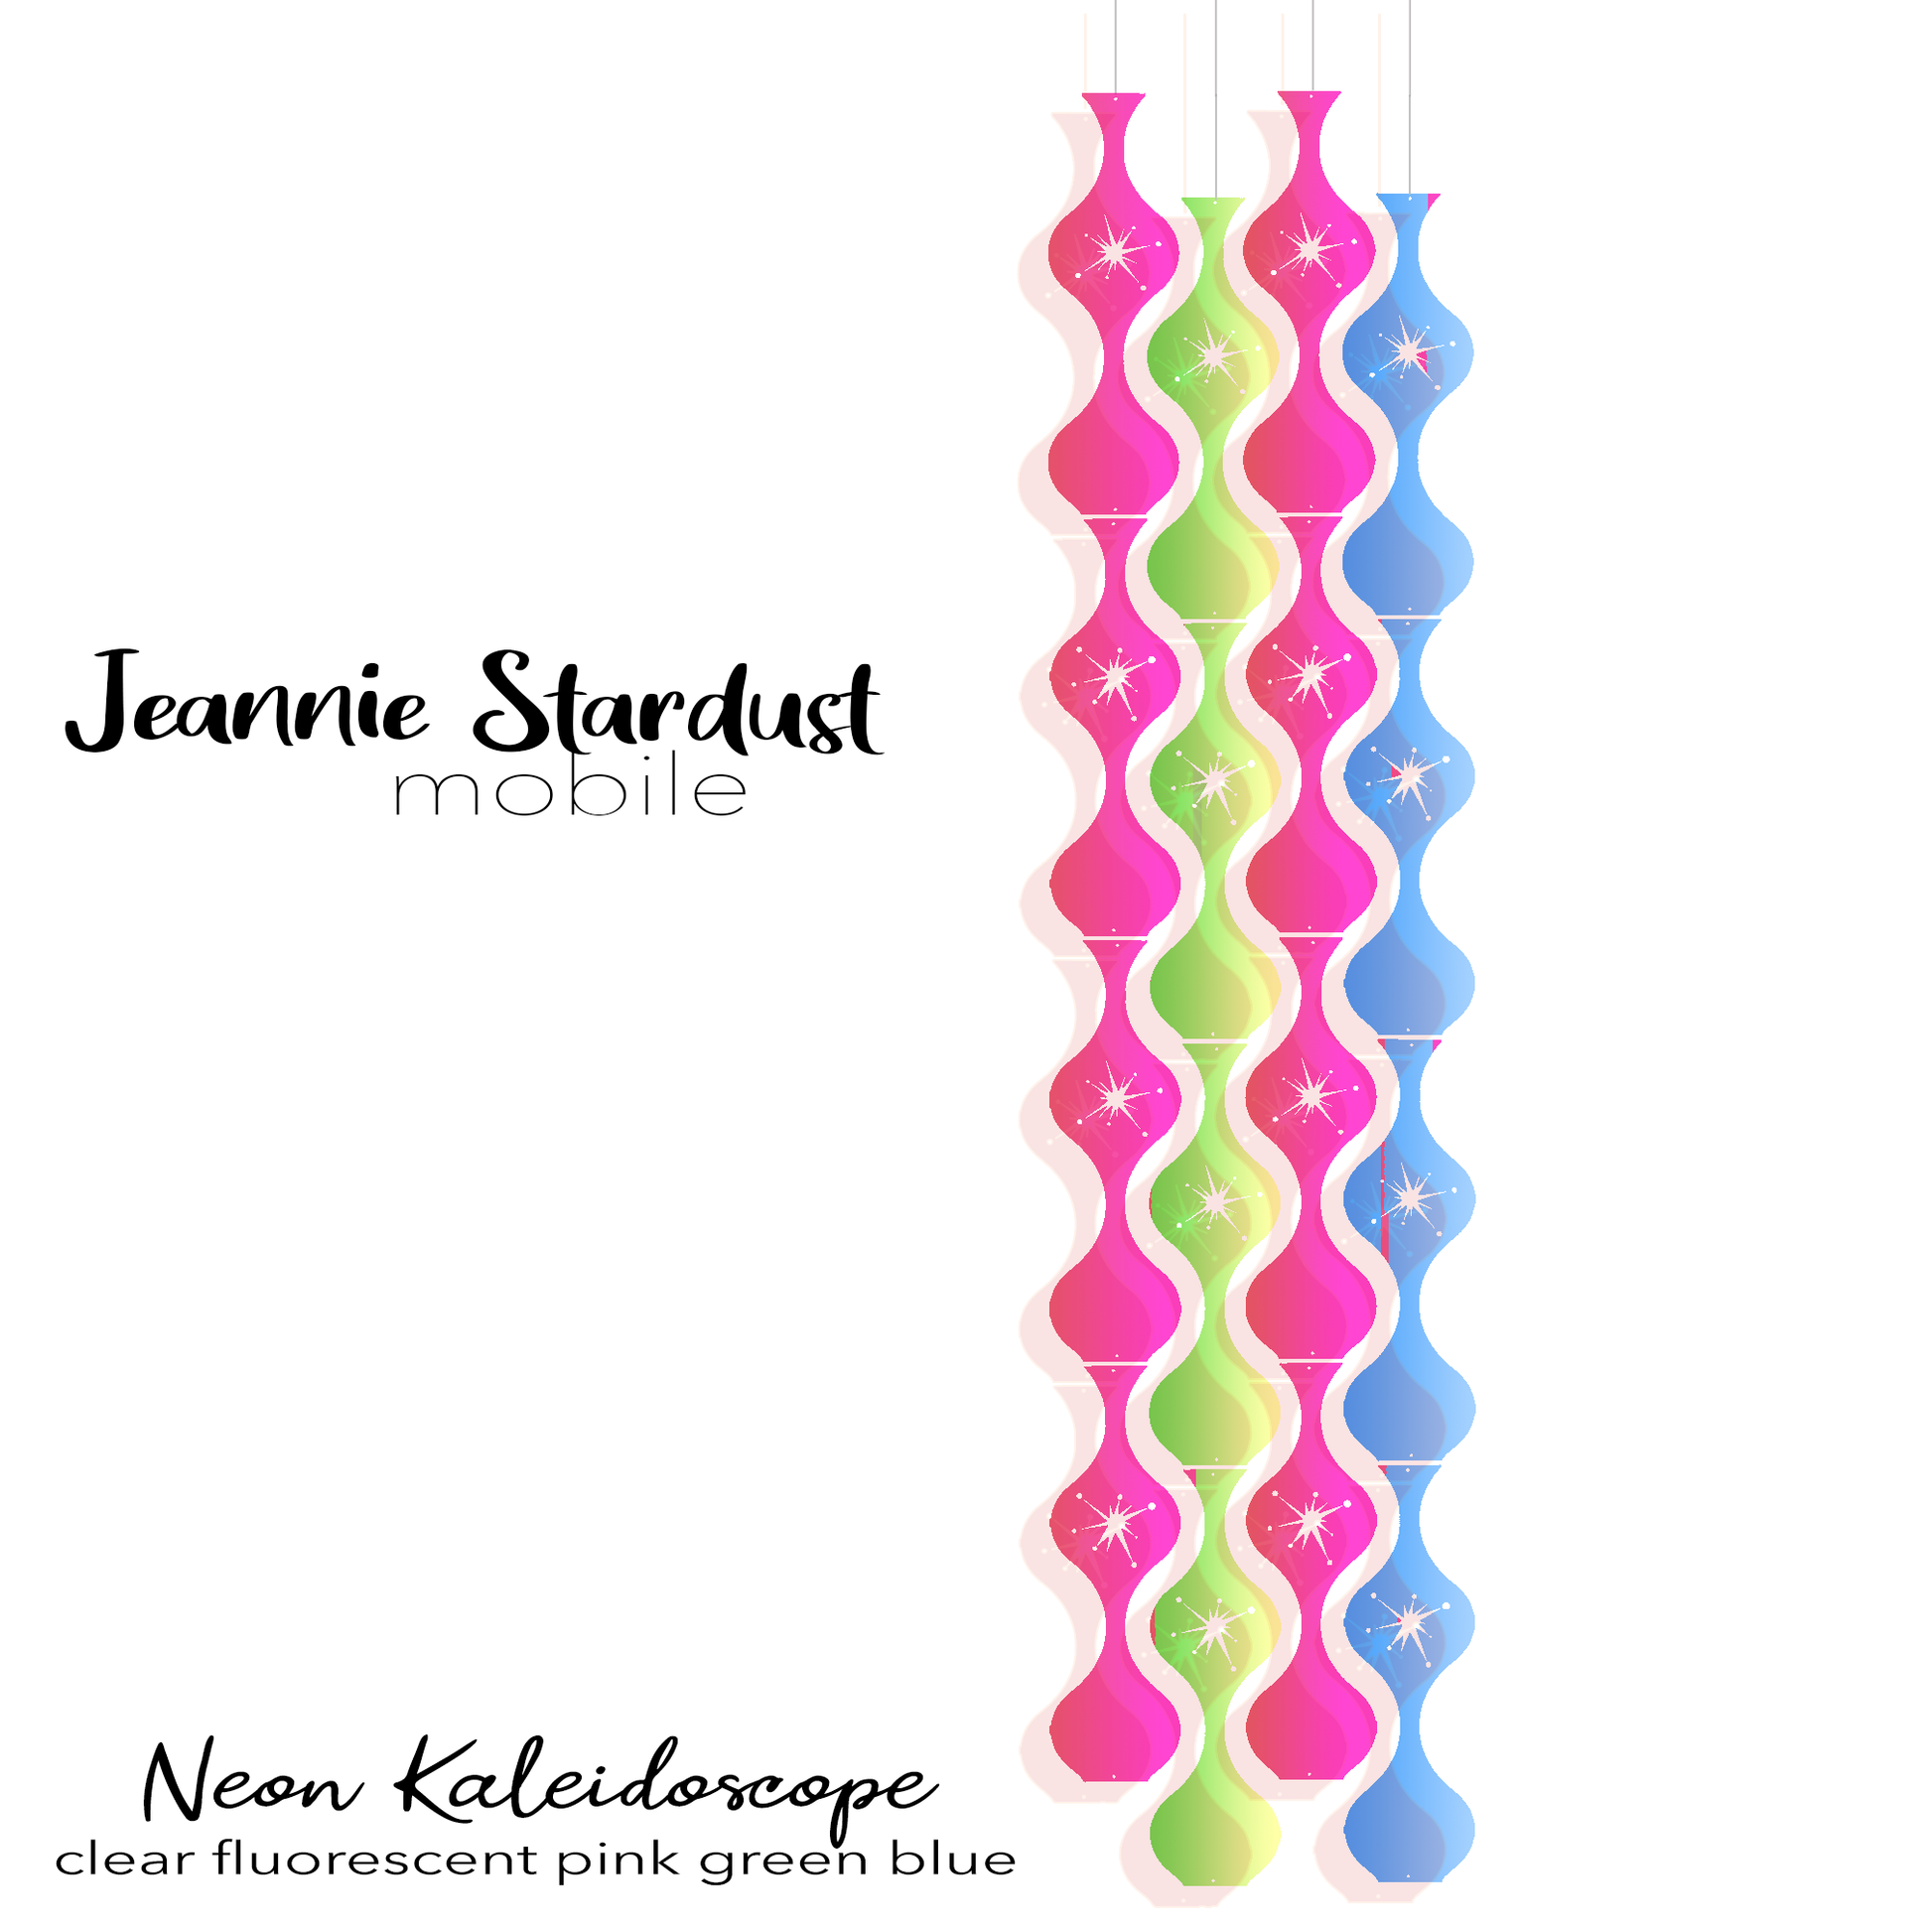 Fluorescent Jeannie Stardust in Neon Multi Colors of Hot Pink, Green, and Blue plexiglass acrylic - DIY KIT for hanging art mobiles for mid century modern room decor by AtomicMobiles.com